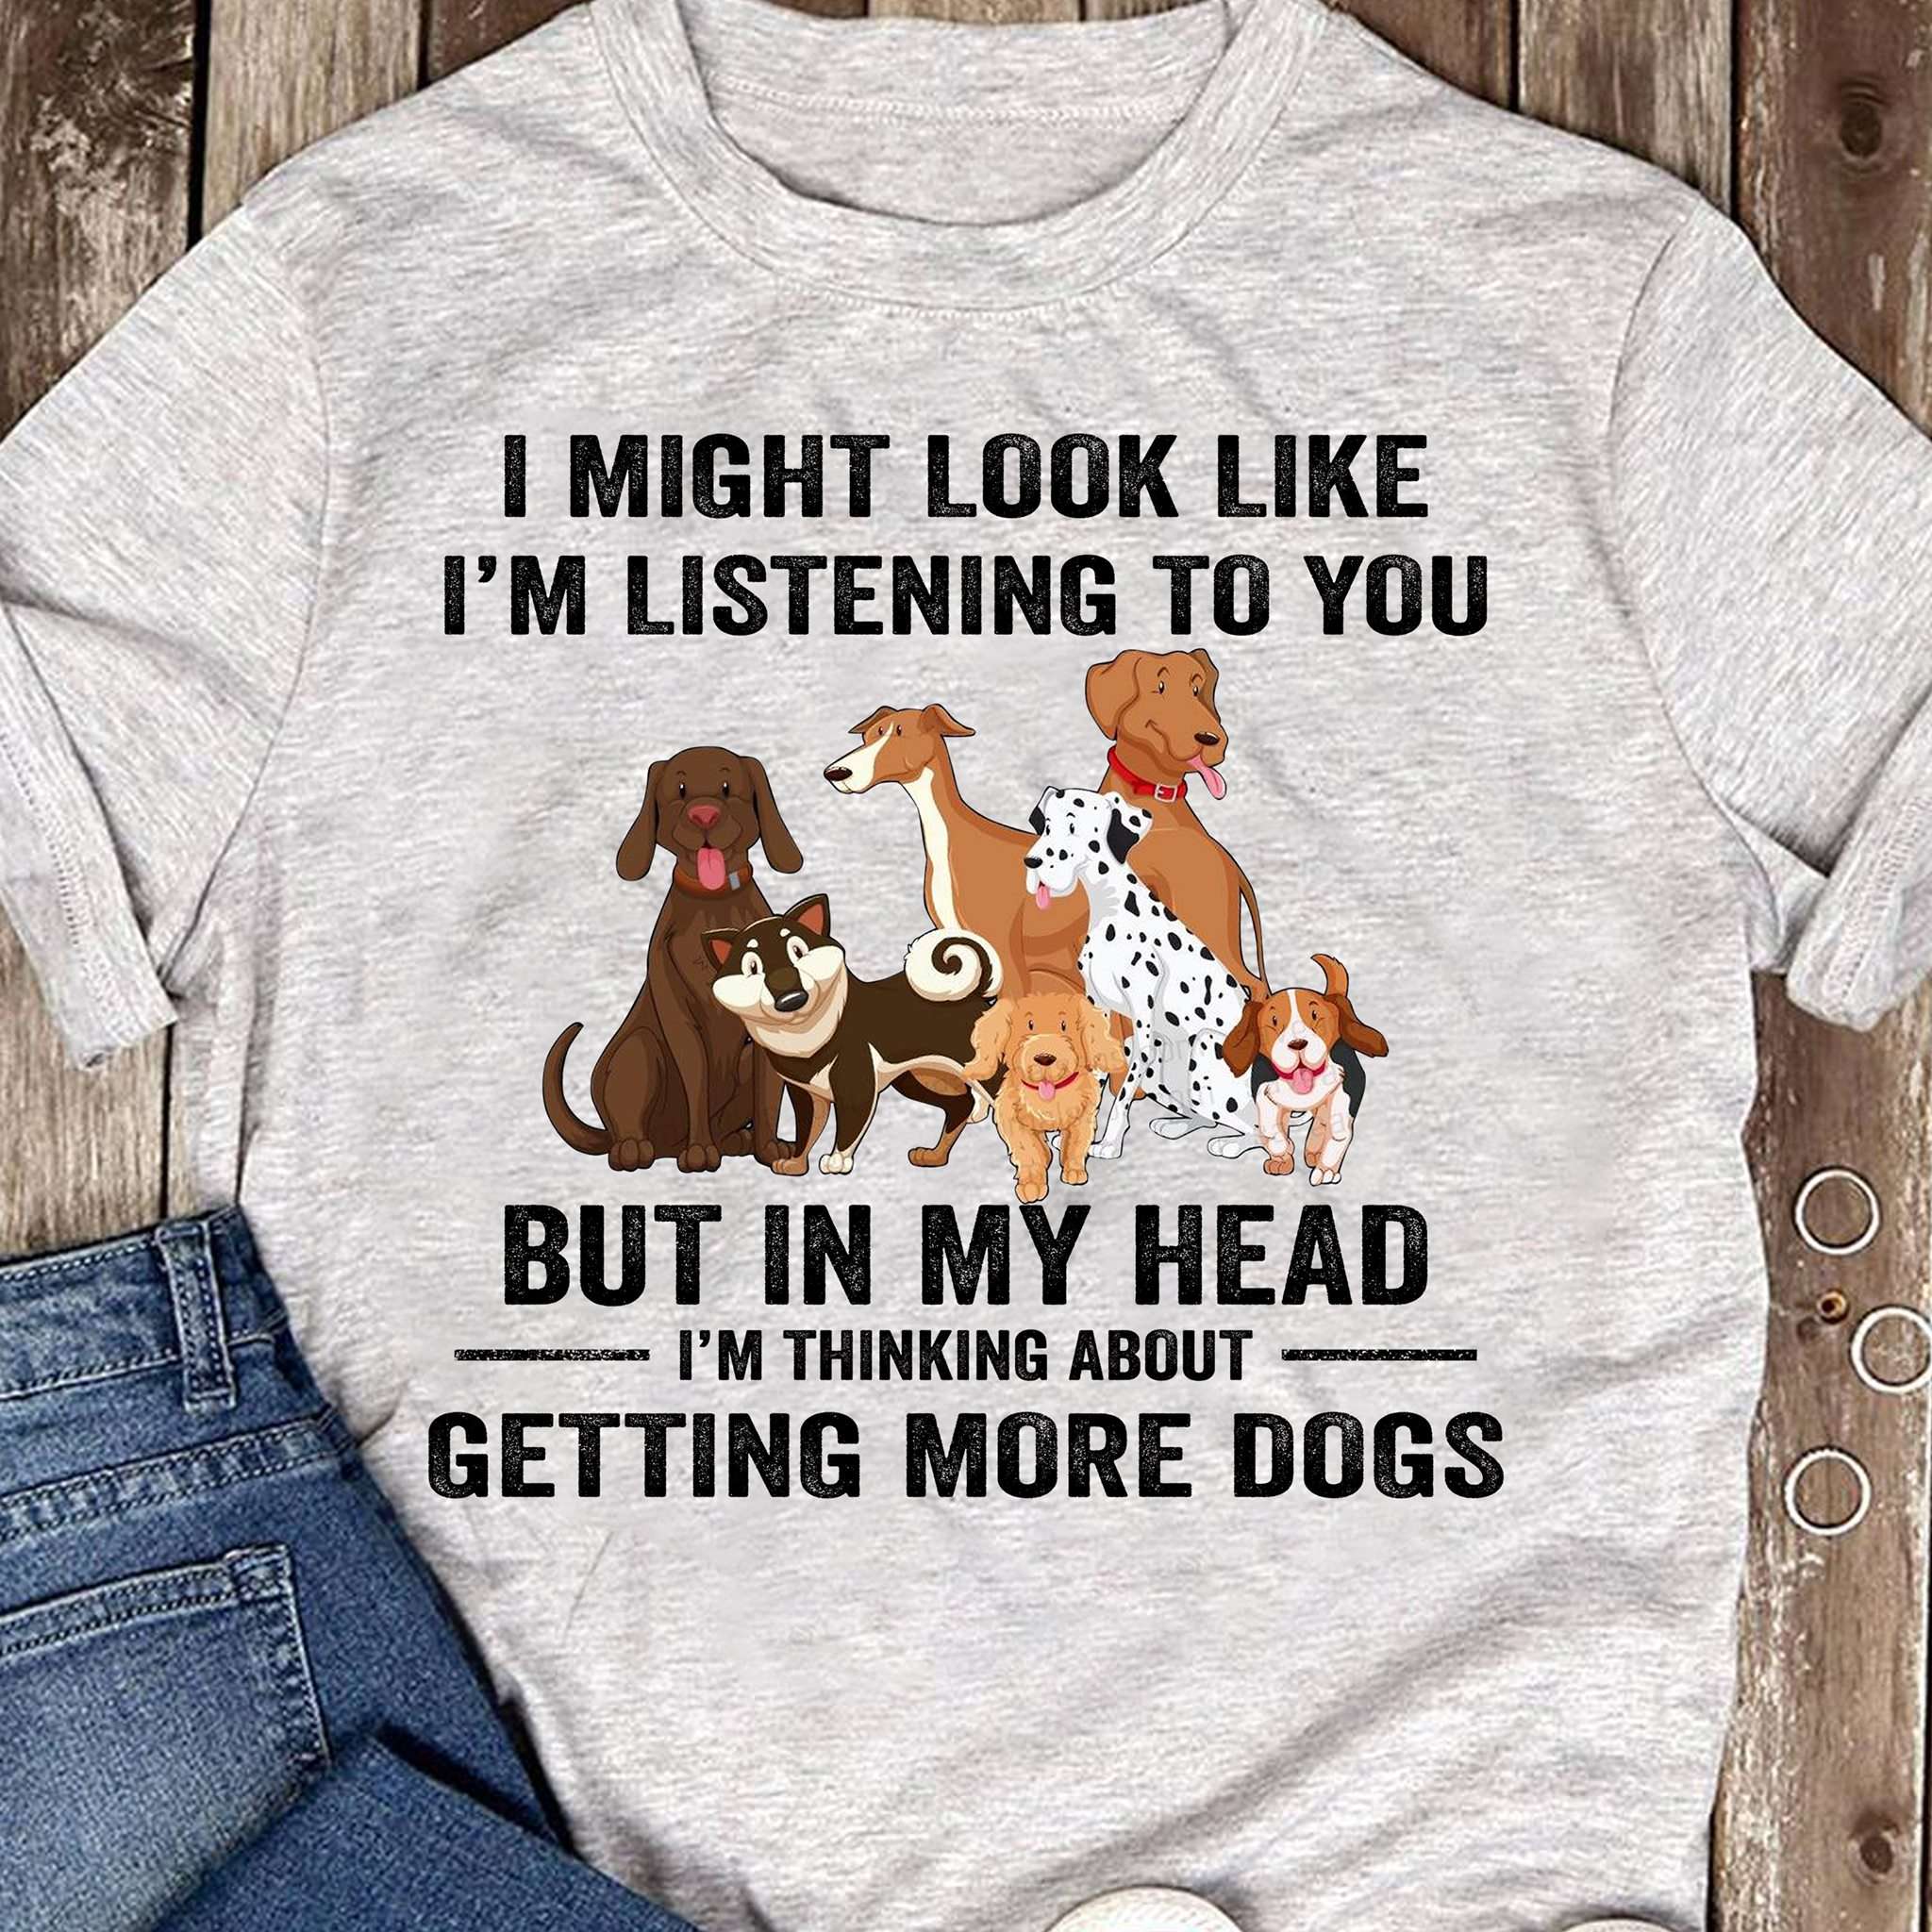 Dogs gracphic T-shirt - I might look like i'm listening to you but in my head i'm thinking about getting more dogs